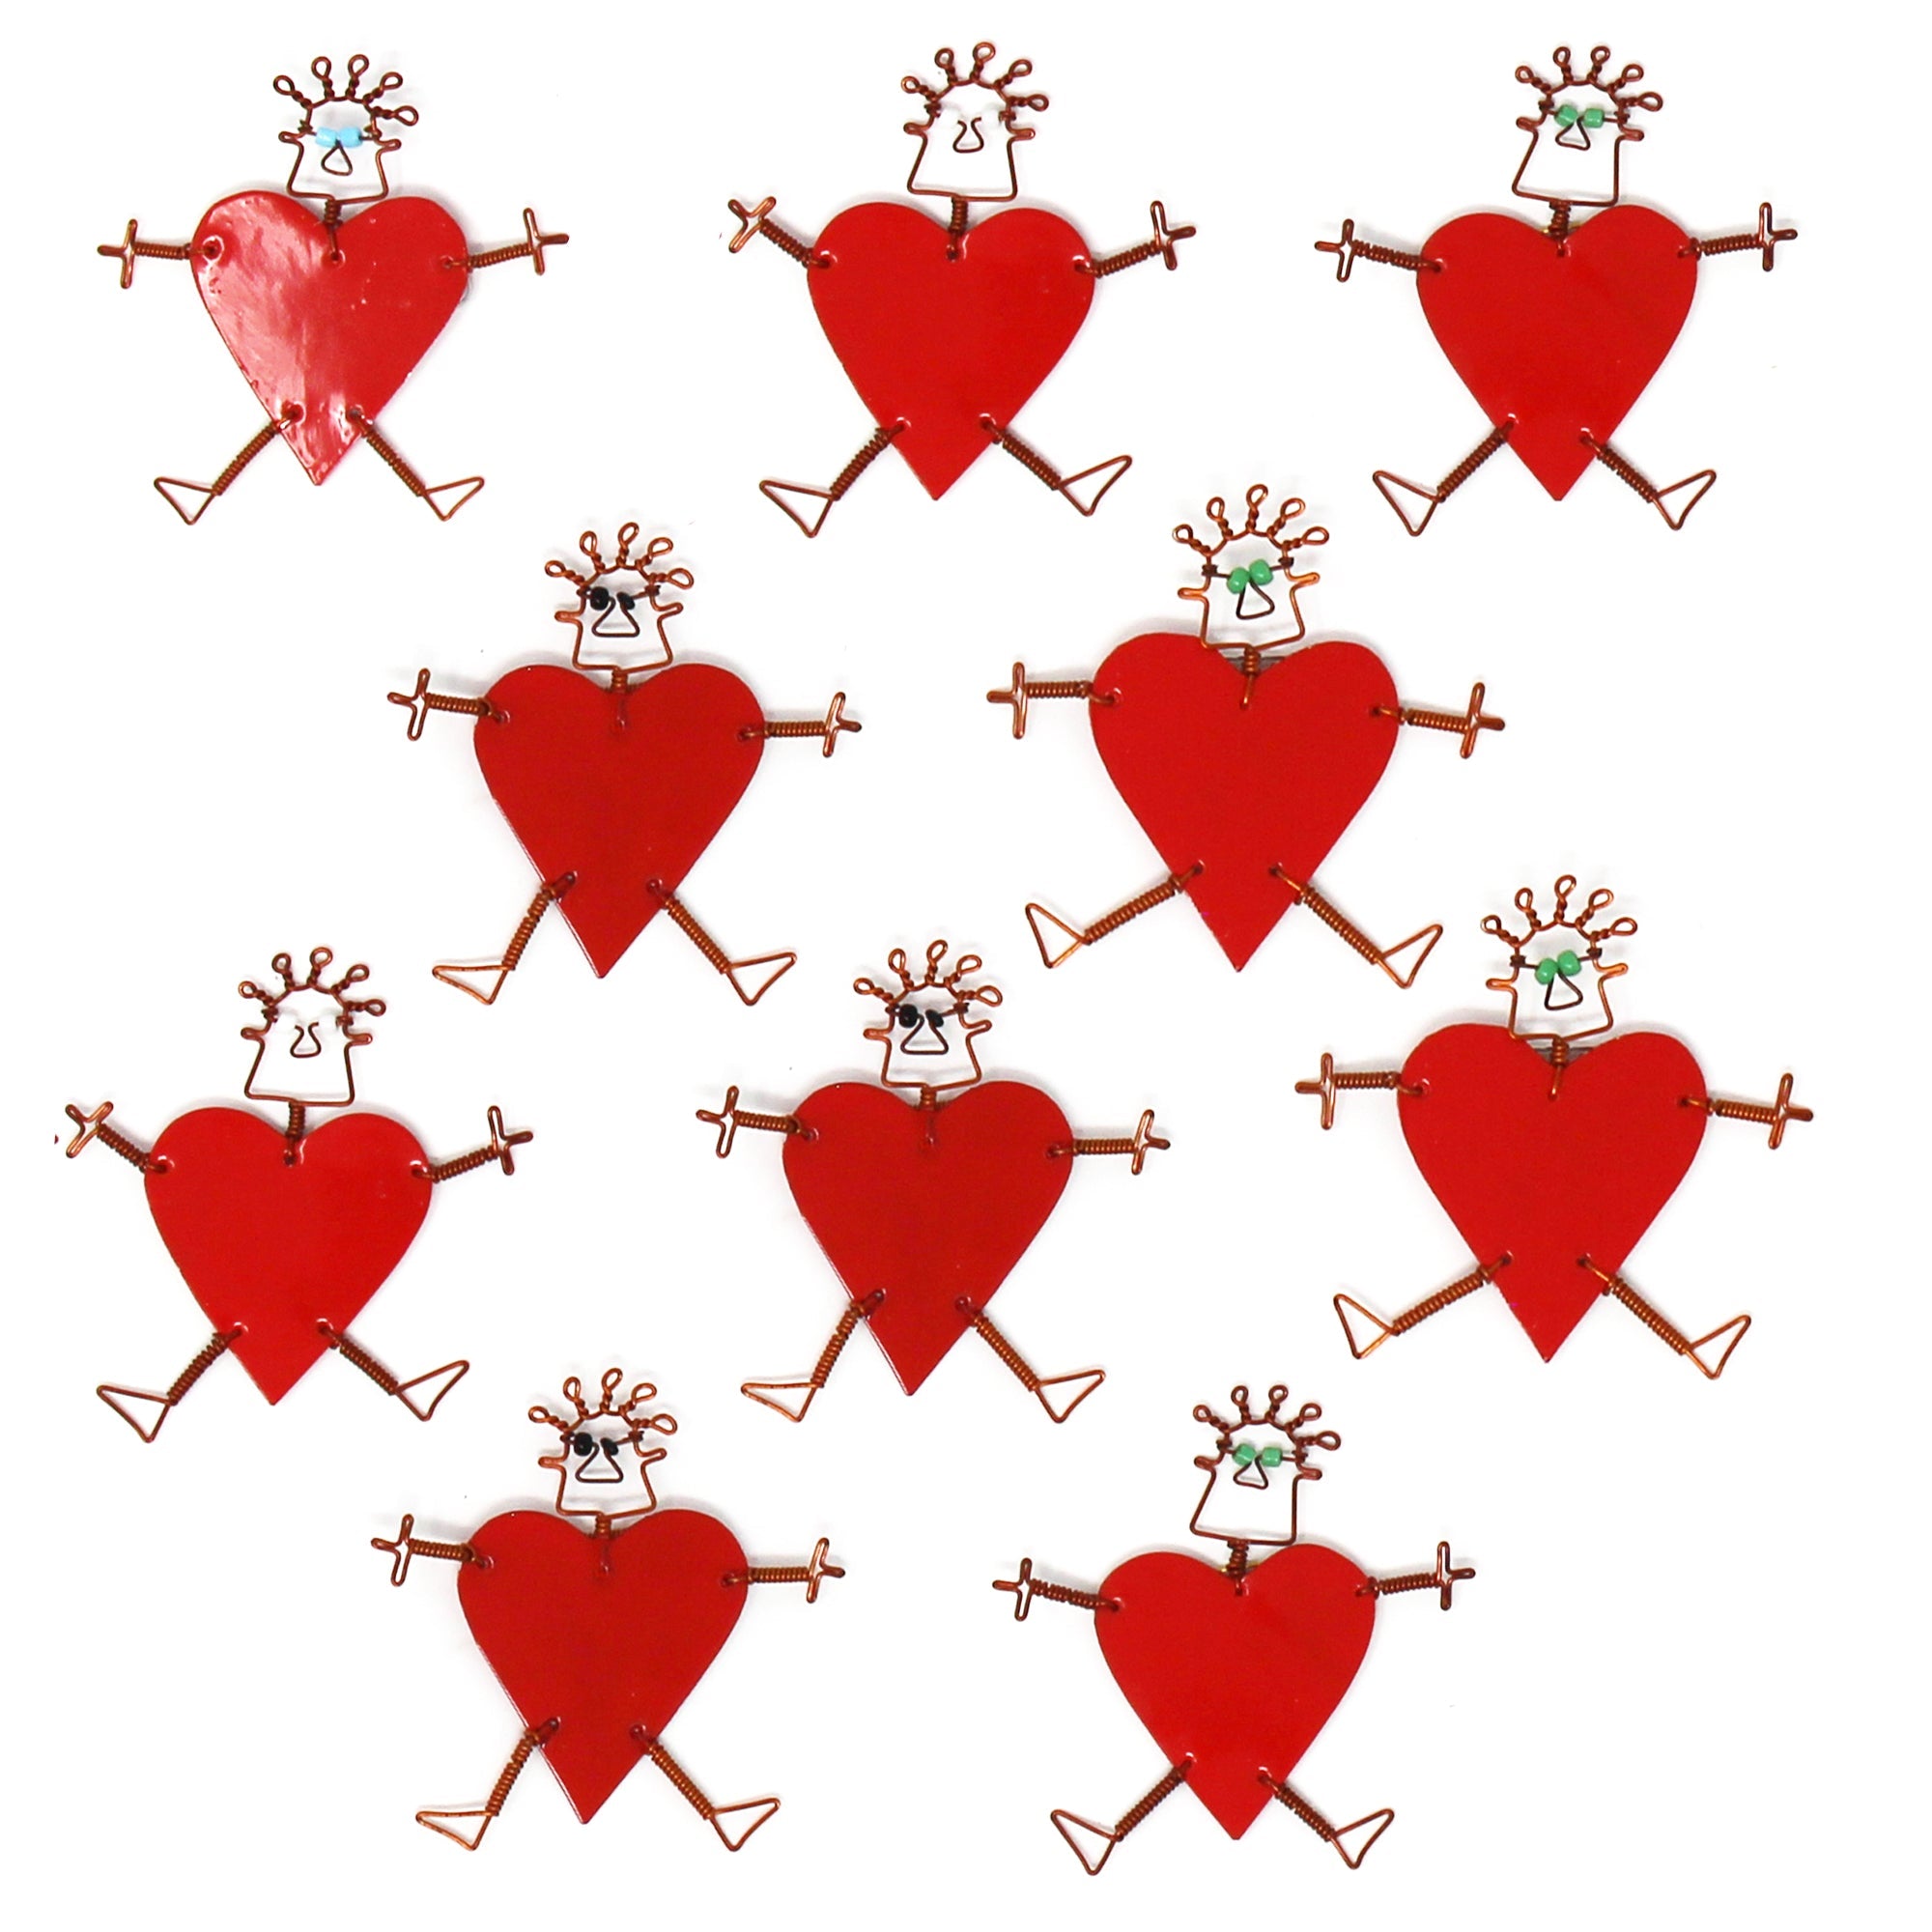 Set of 10 Dancing Girl Heart Body Pins in Red - Creative Alternatives